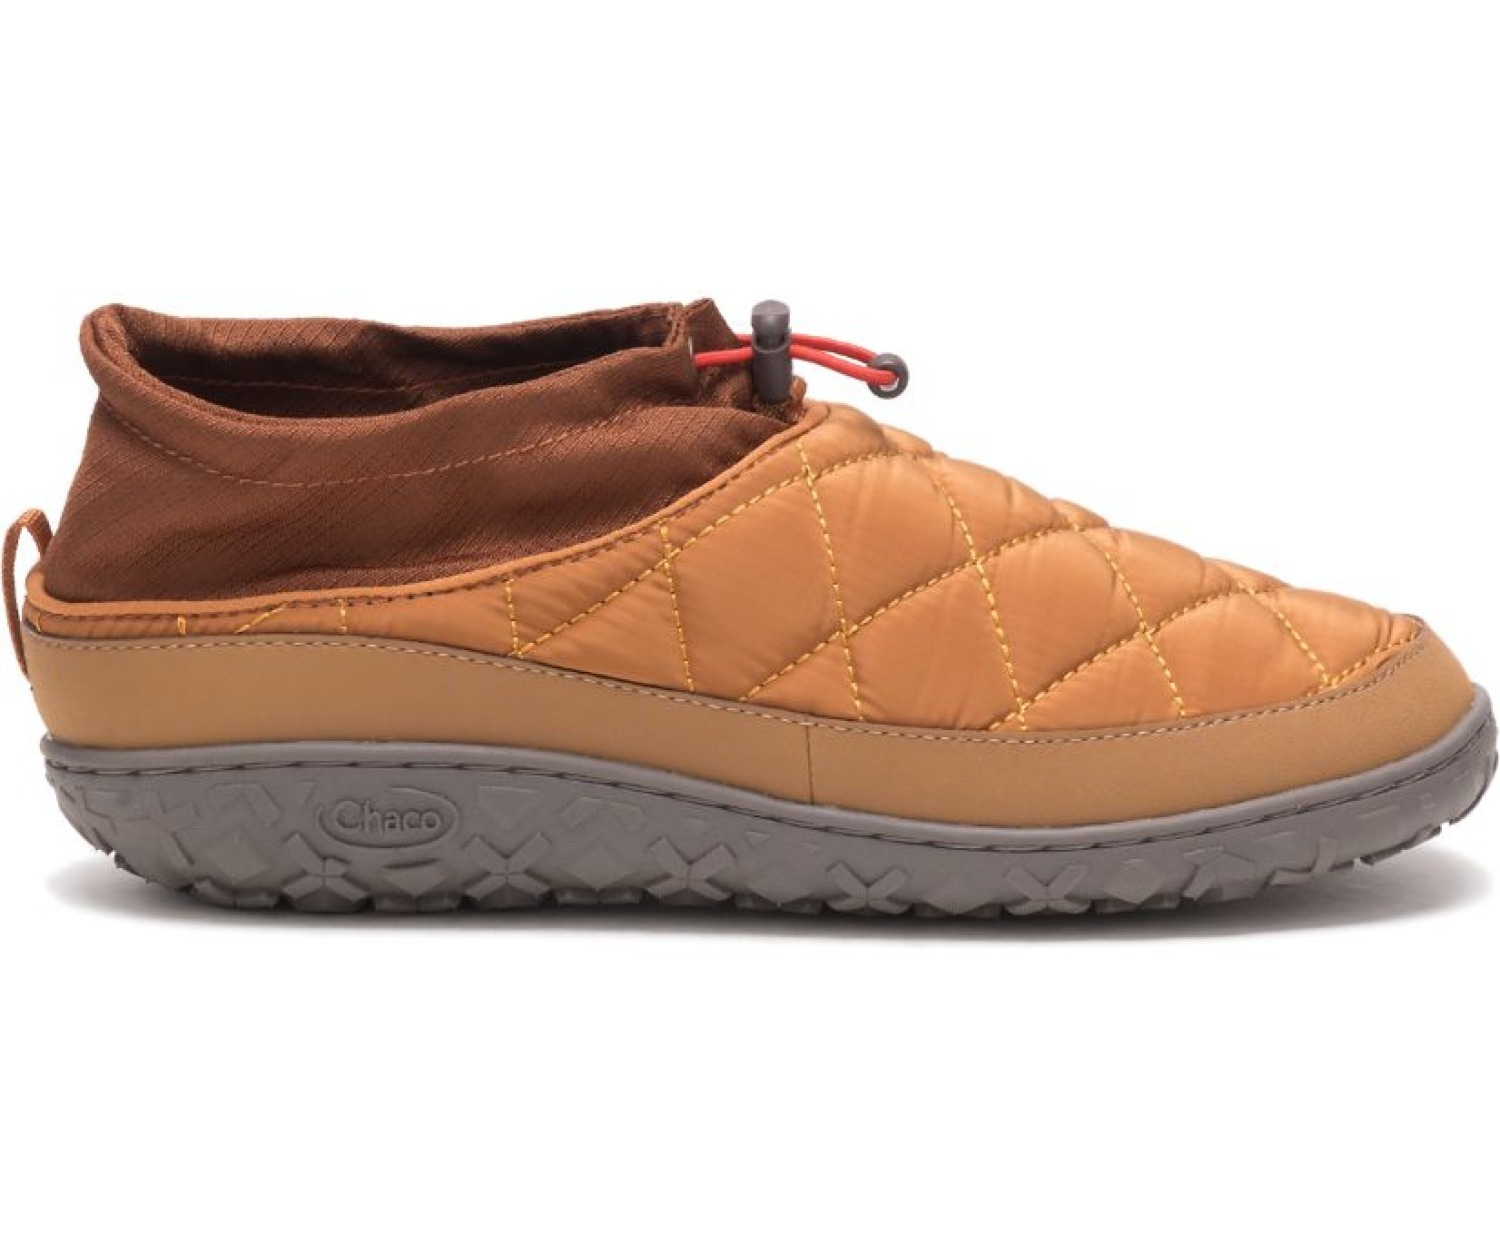 Chacos Mens & Womens Ramble Puff Cinch Shoes (Various Colors) $40 + Free Shipping